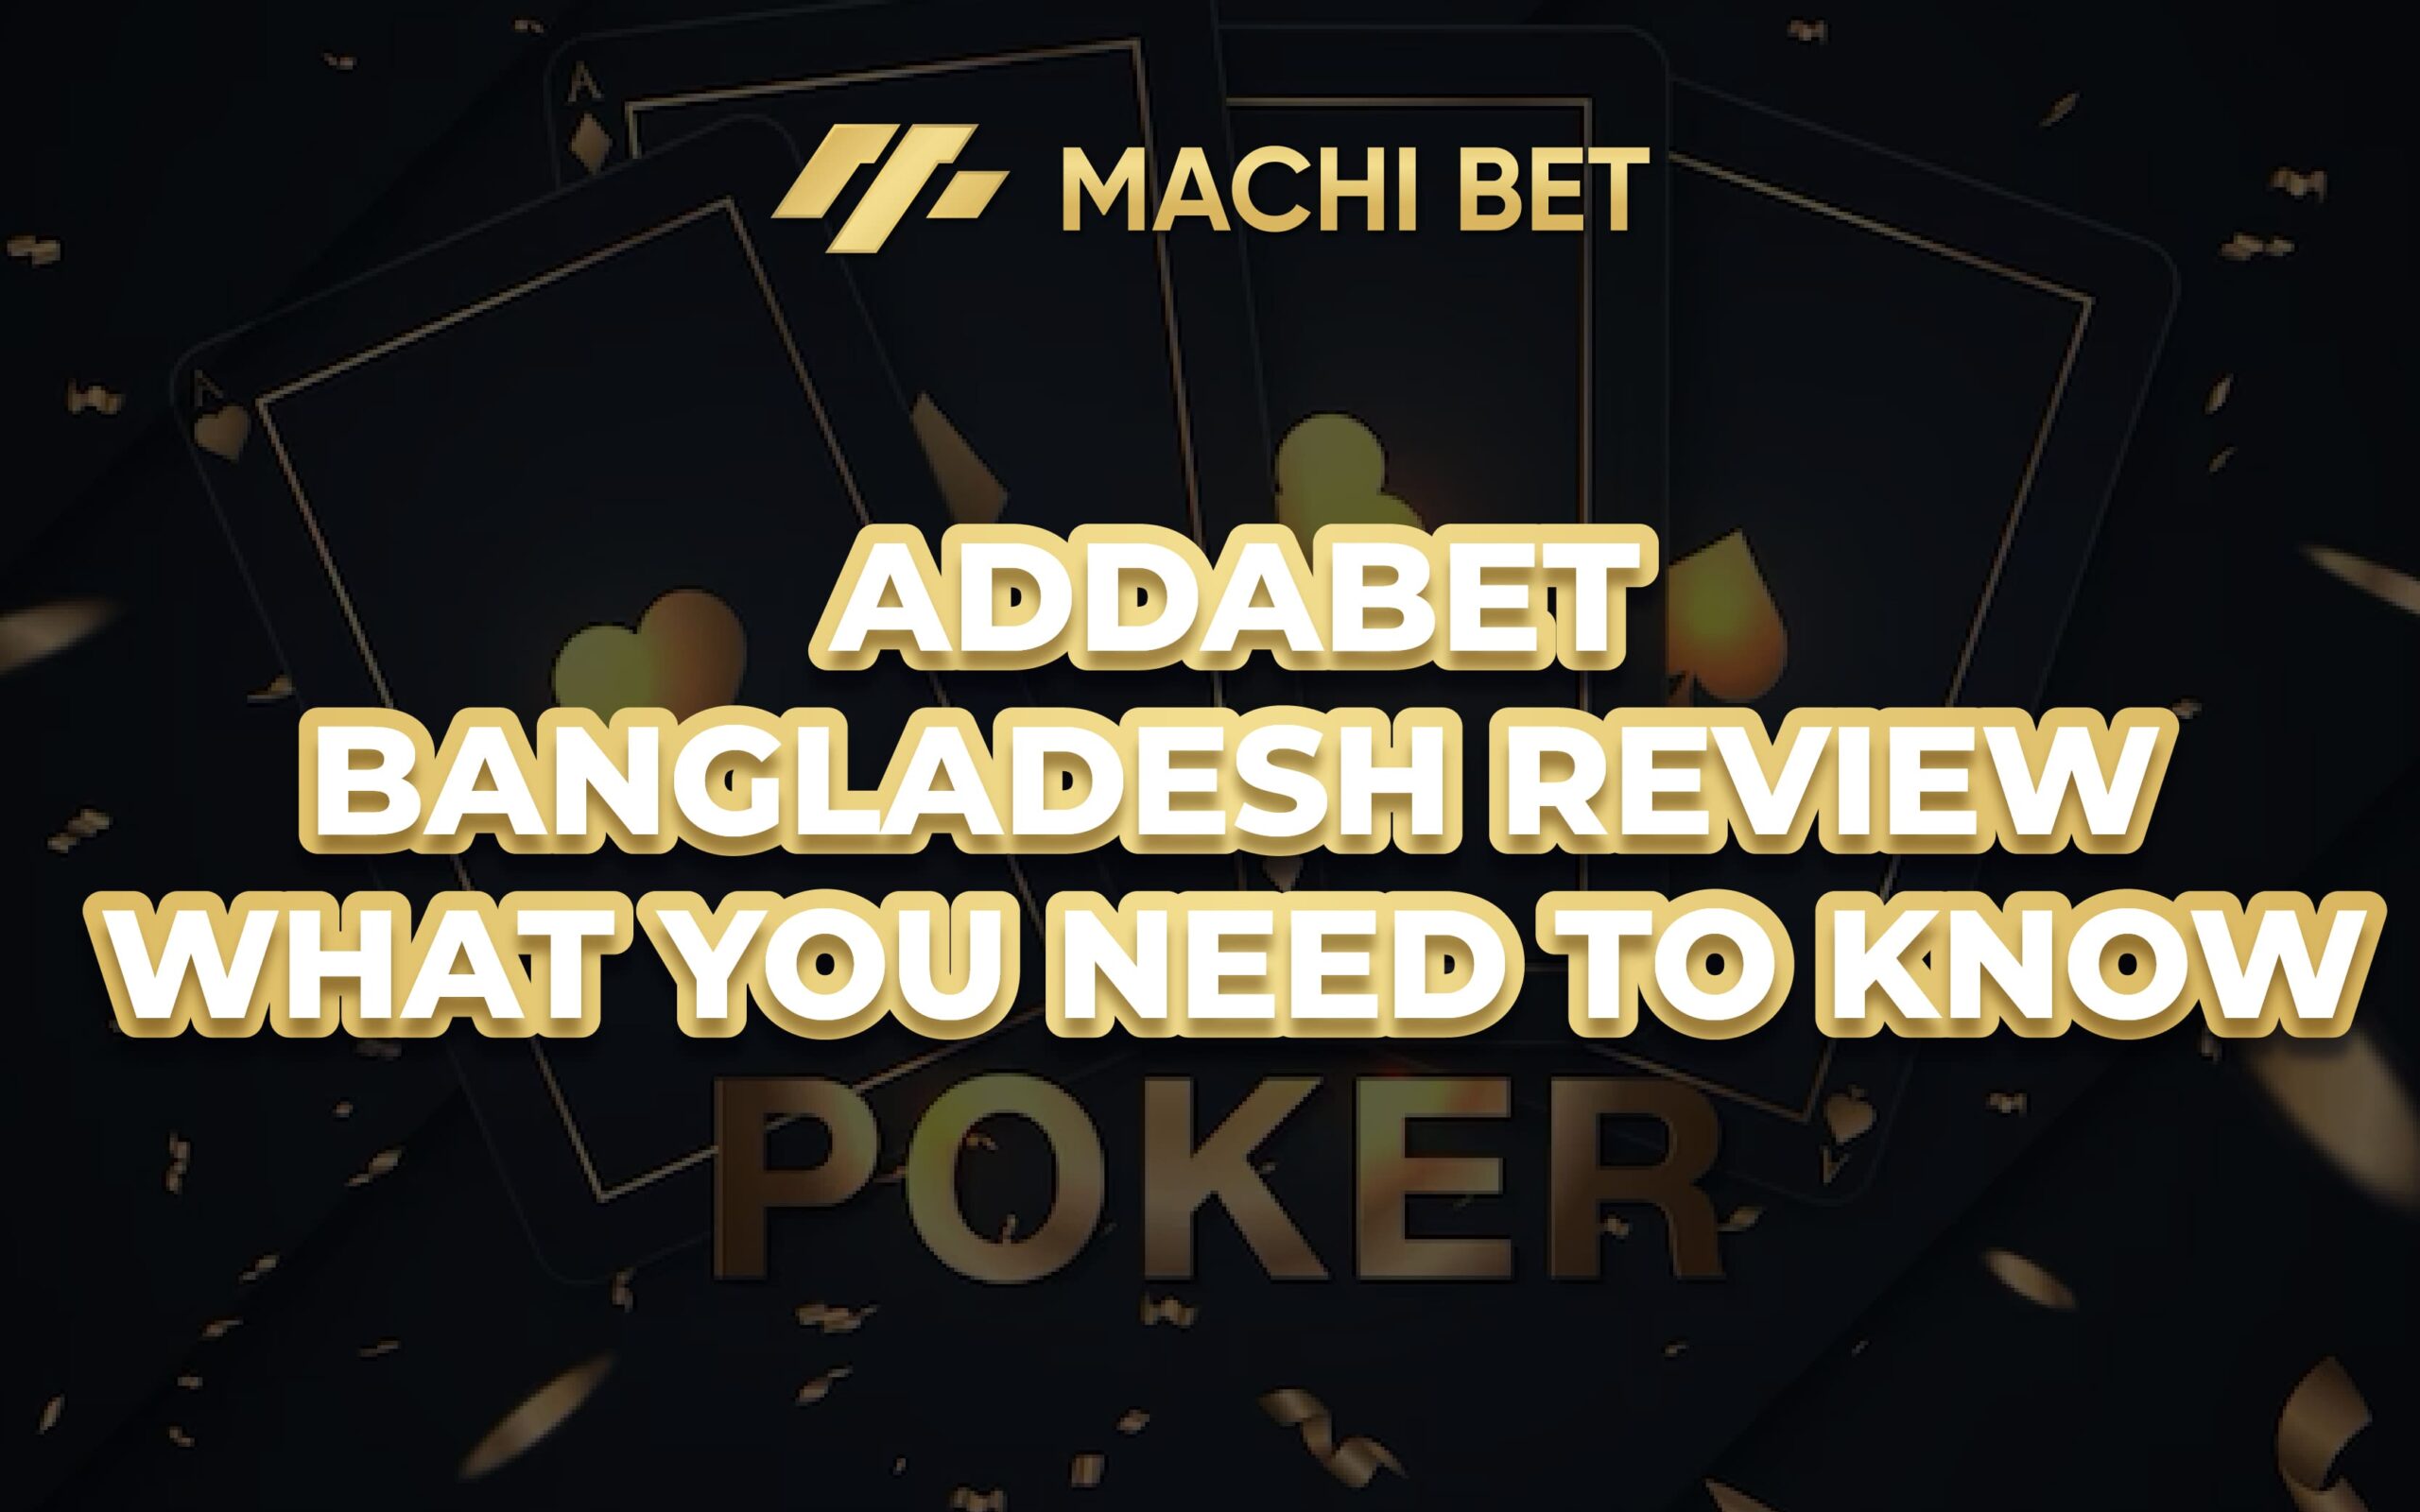 Addabet Bangladesh Review – What you need to know